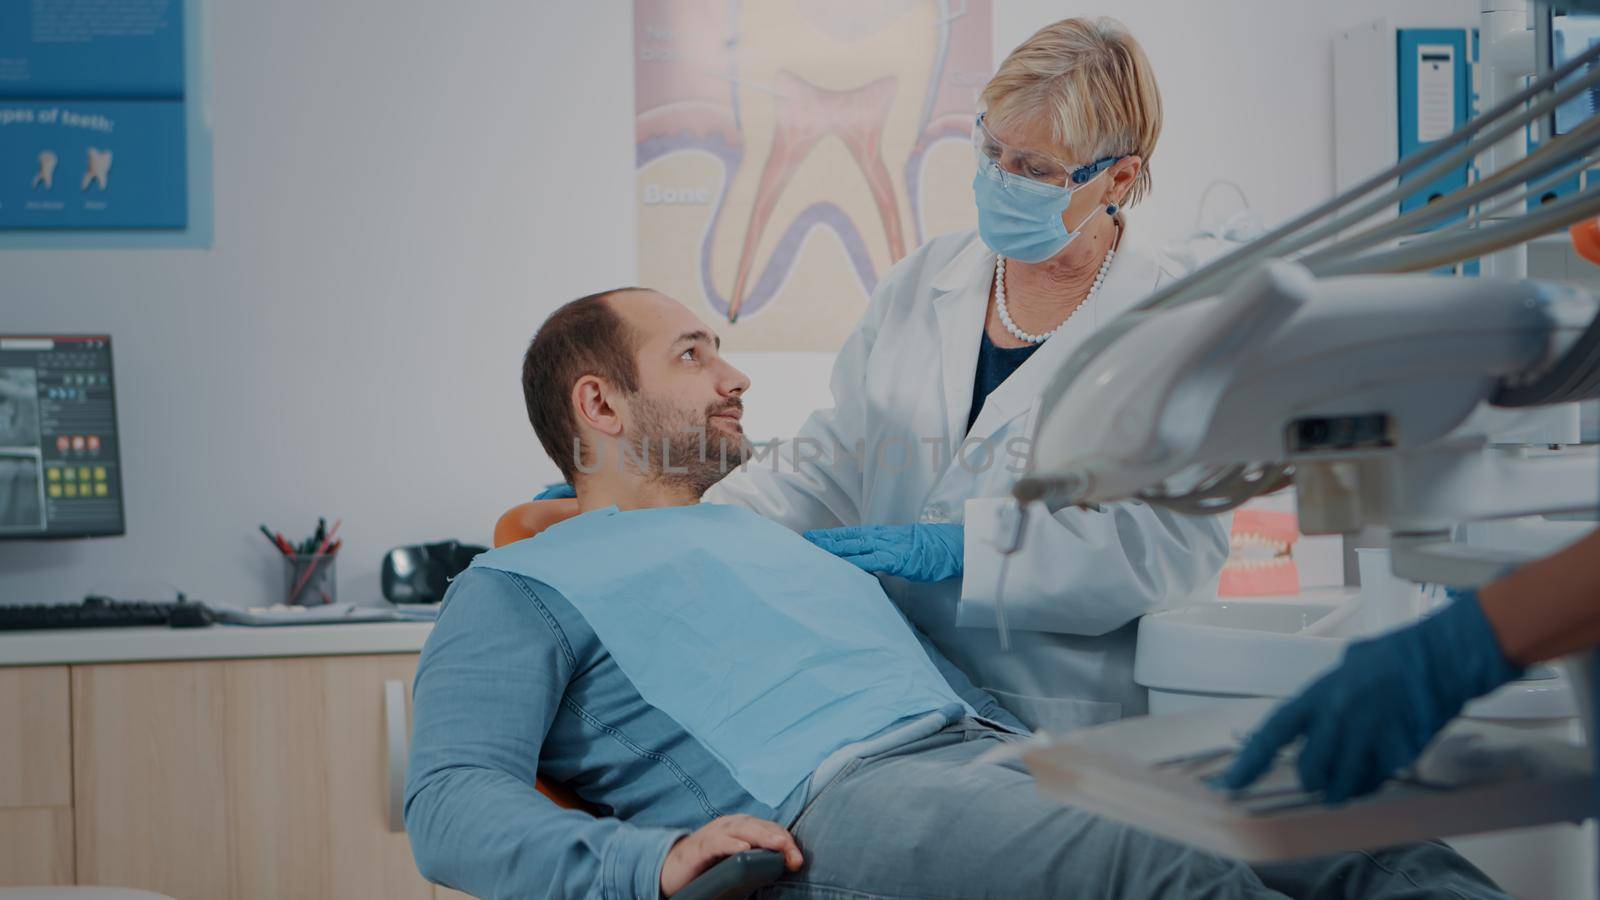 Patient opening mouth and dentist examining dentition work after surgery. Stomatologist doing oral care consultation with instruments, treating man at stomatology checkup appointment.